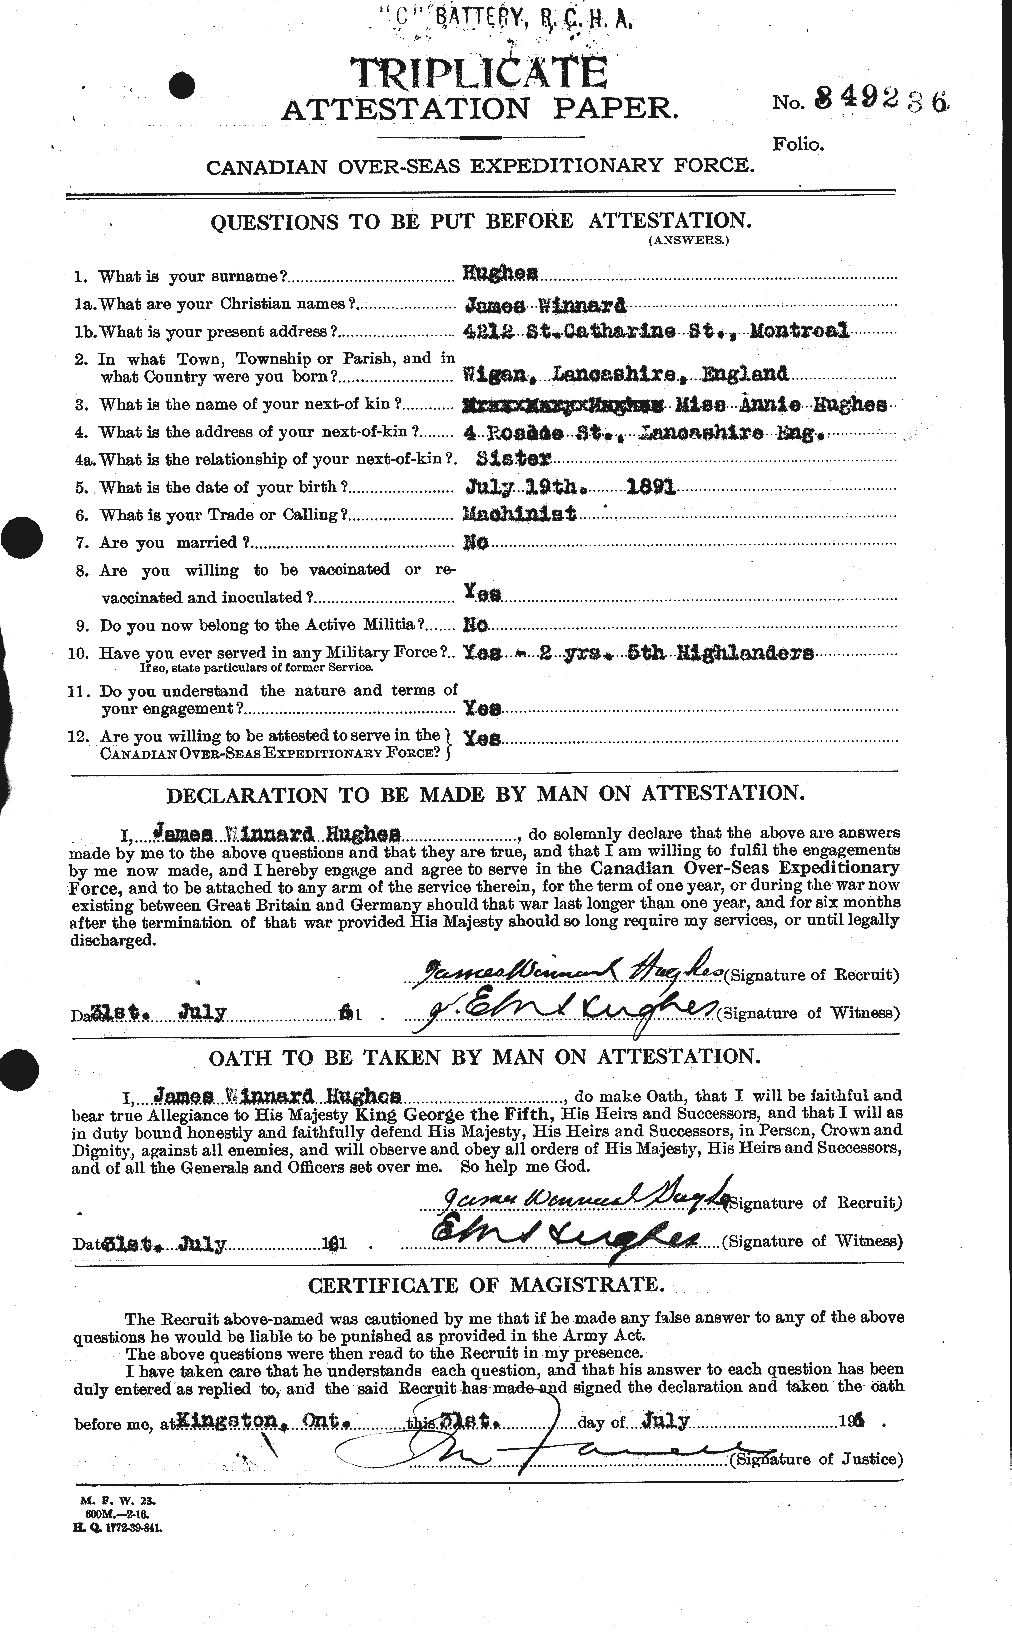 Personnel Records of the First World War - CEF 403974a